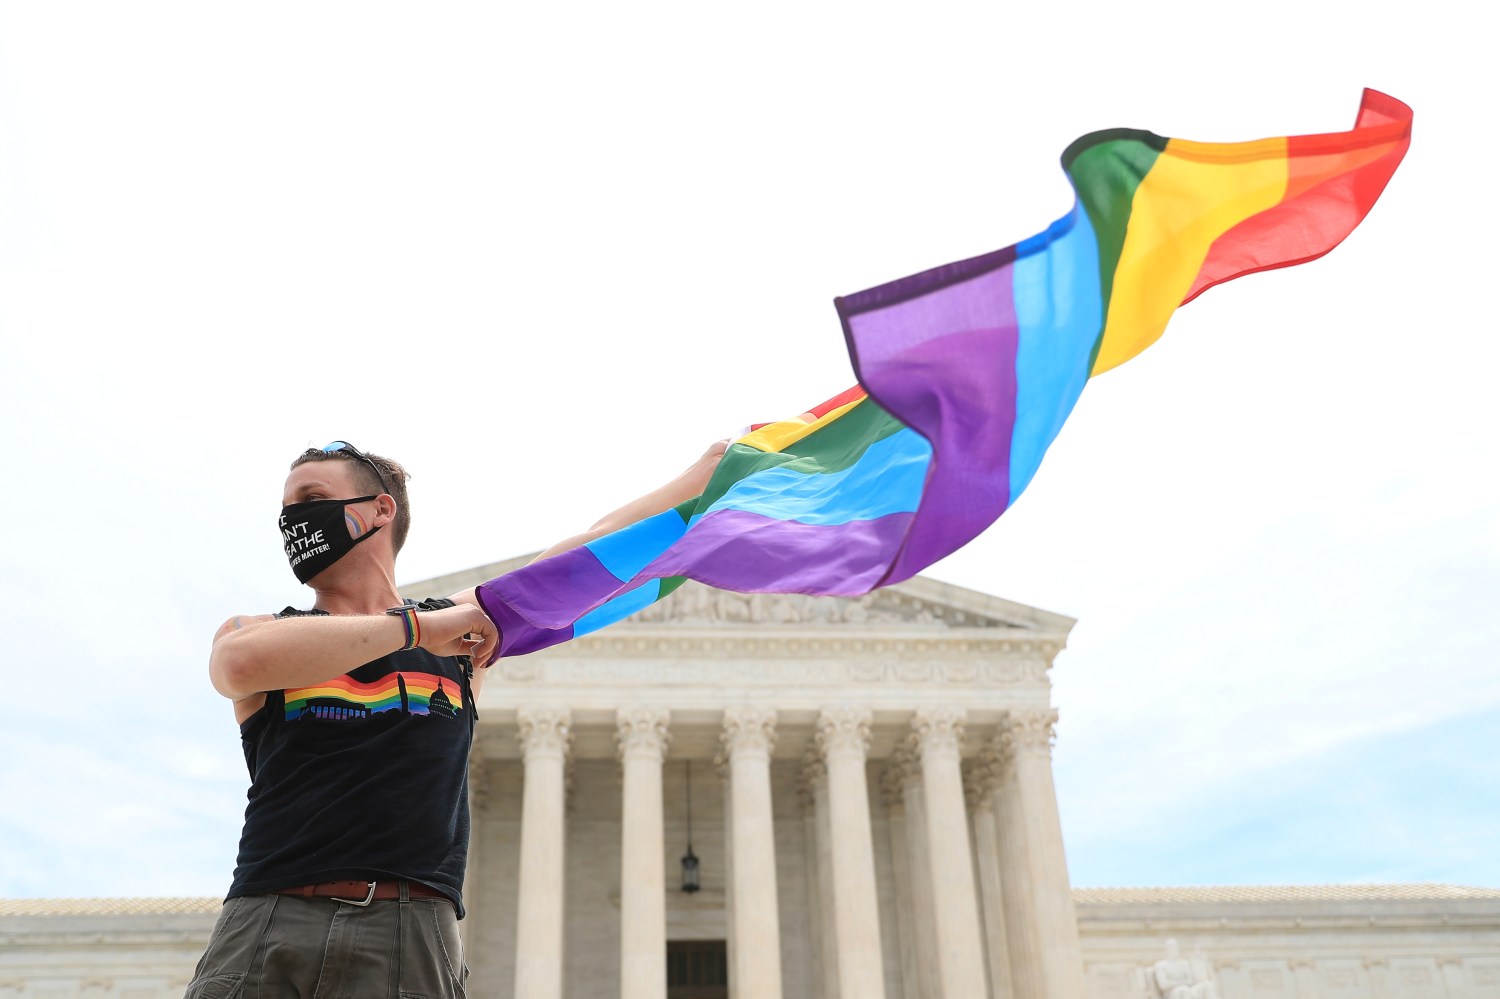 Joseph Fons holding a Pride Flag, stands in front of the U.S. Supreme Court building after the court ruled that a federal law banning workplace discrimination also covers sexual orientation, in Washington, D.C., U.S., June 15, 2020. REUTERS/Tom Brenner